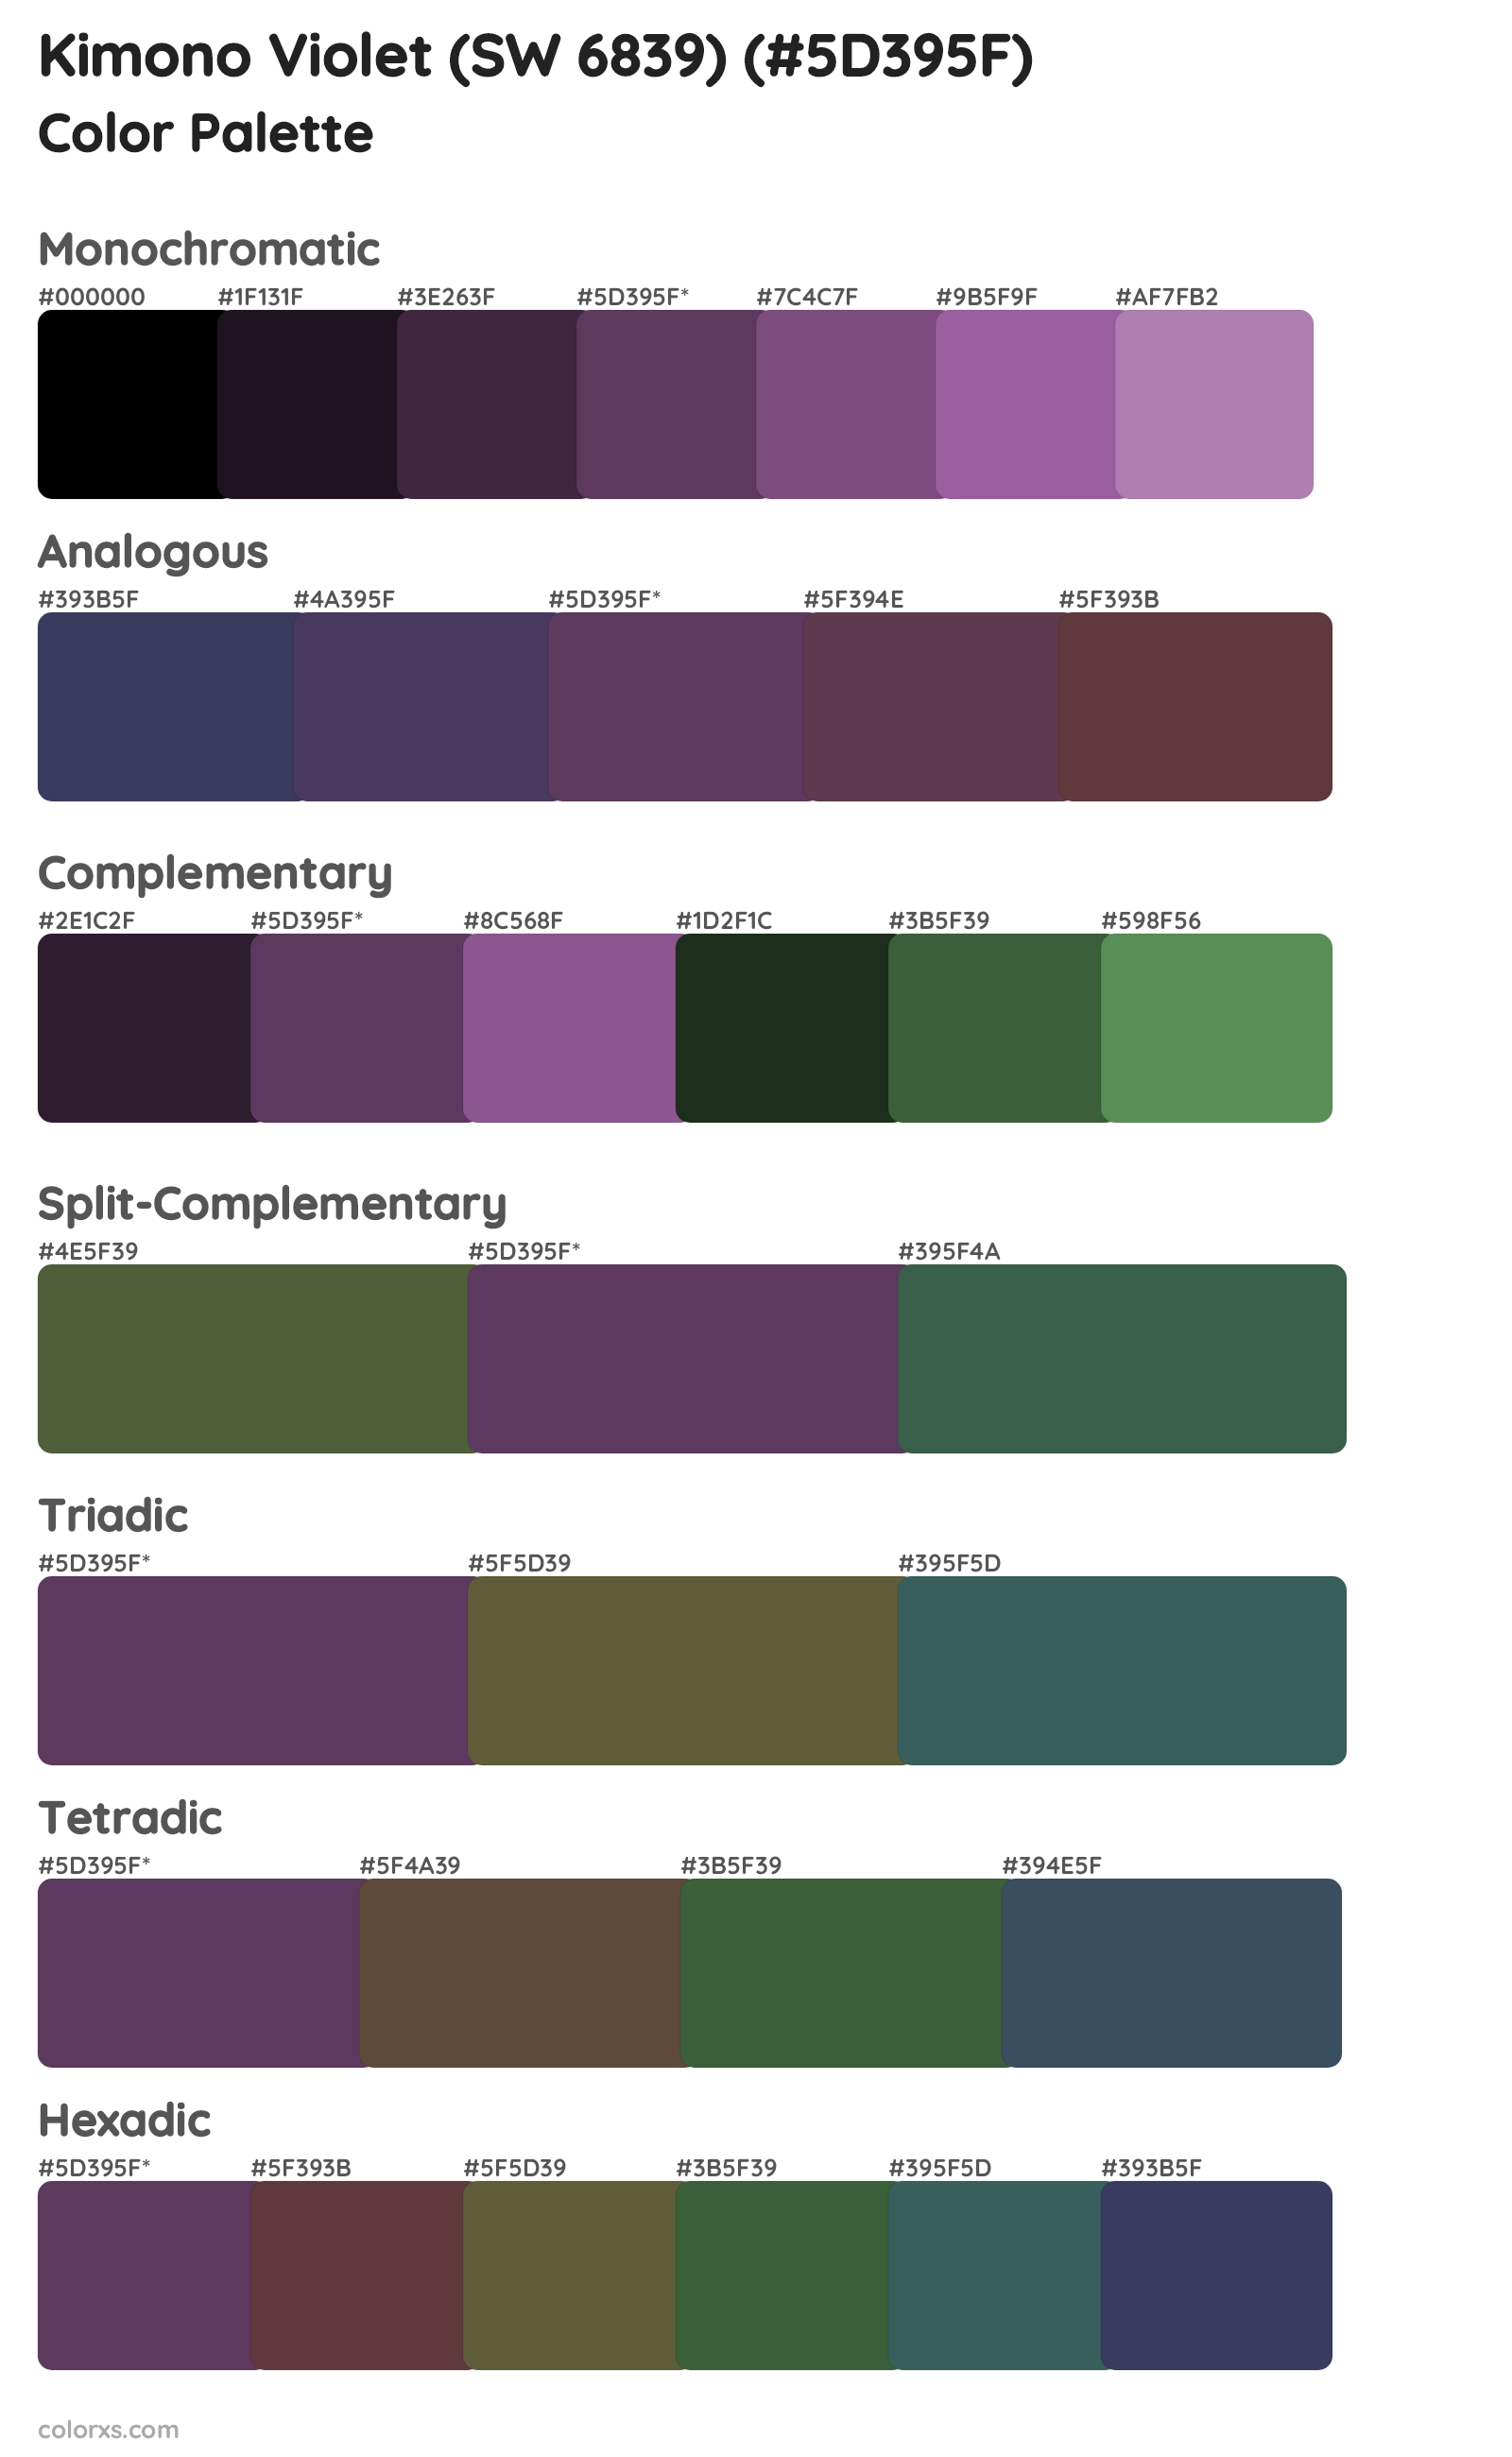 Sherwin Williams Kimono Violet (SW 6839) Paint color palettes and 